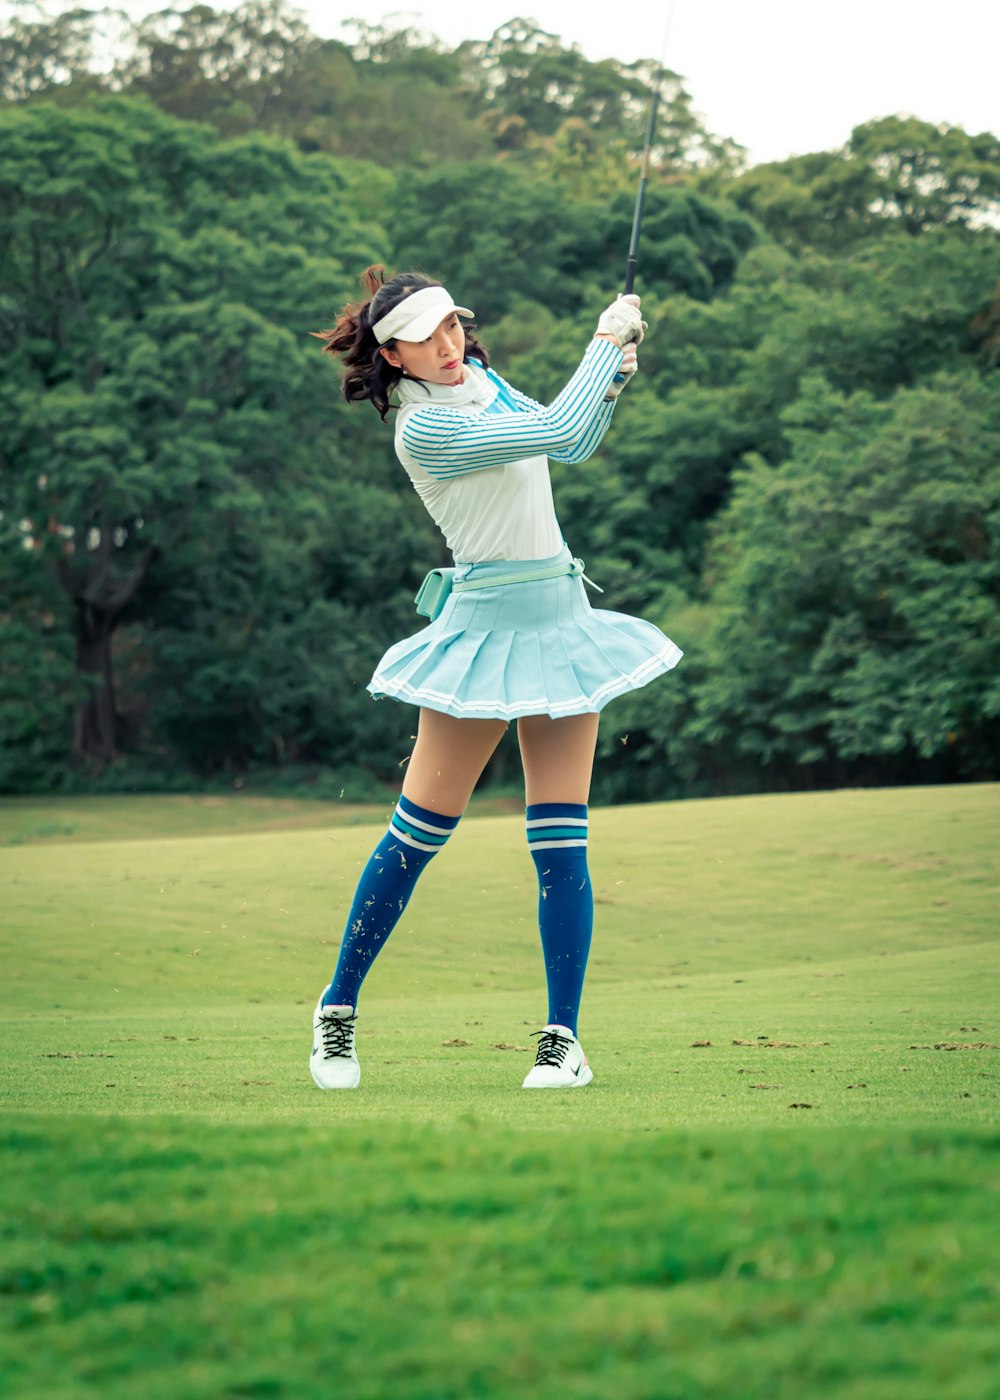 a woman in a short skirt is playing golf